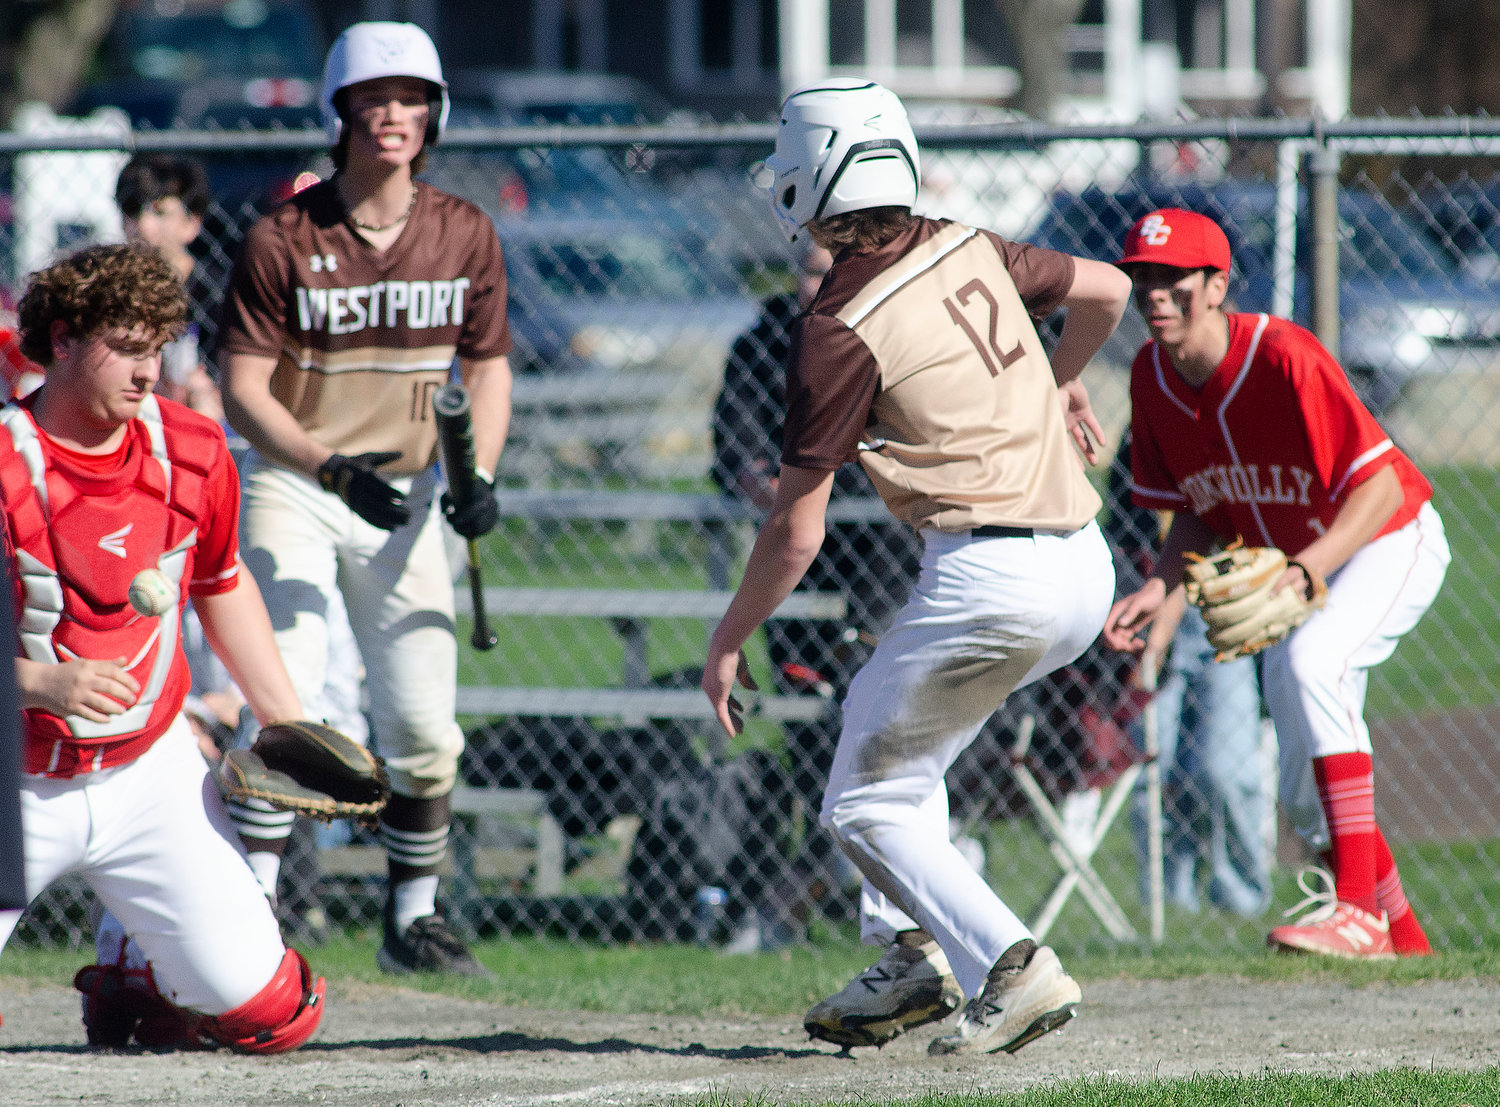 Noah Sowle (left) looks on as Cam Leary runs home to tie the game 1-1 in the bottom of the second inning on a double by Ben Boudria.